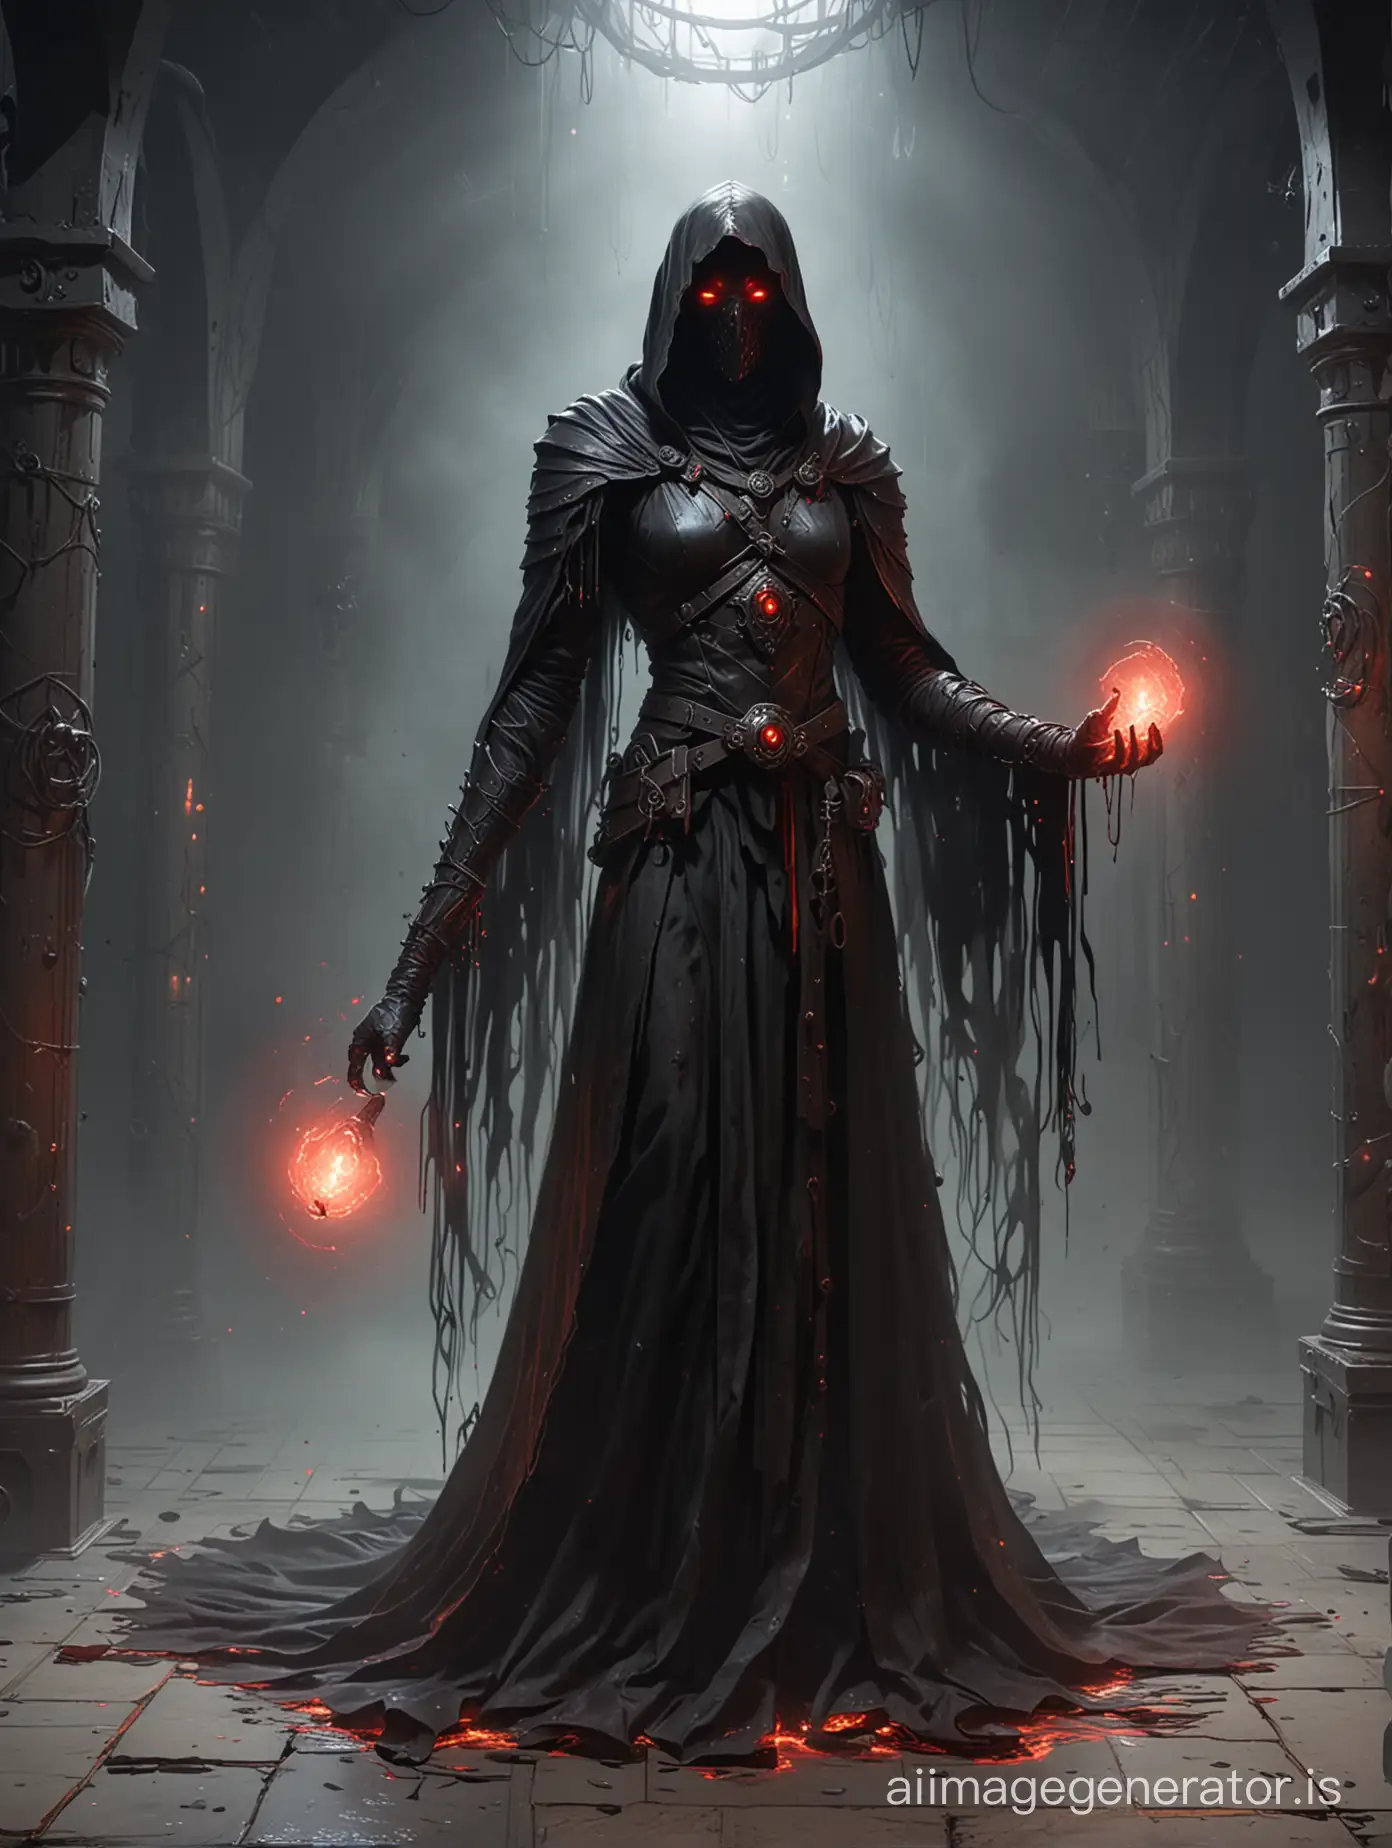 DnD shadowy transparent wraith wizard with red glowing eyes, floating above the floor in a large room. iron bound chest. Underground dungeon themed